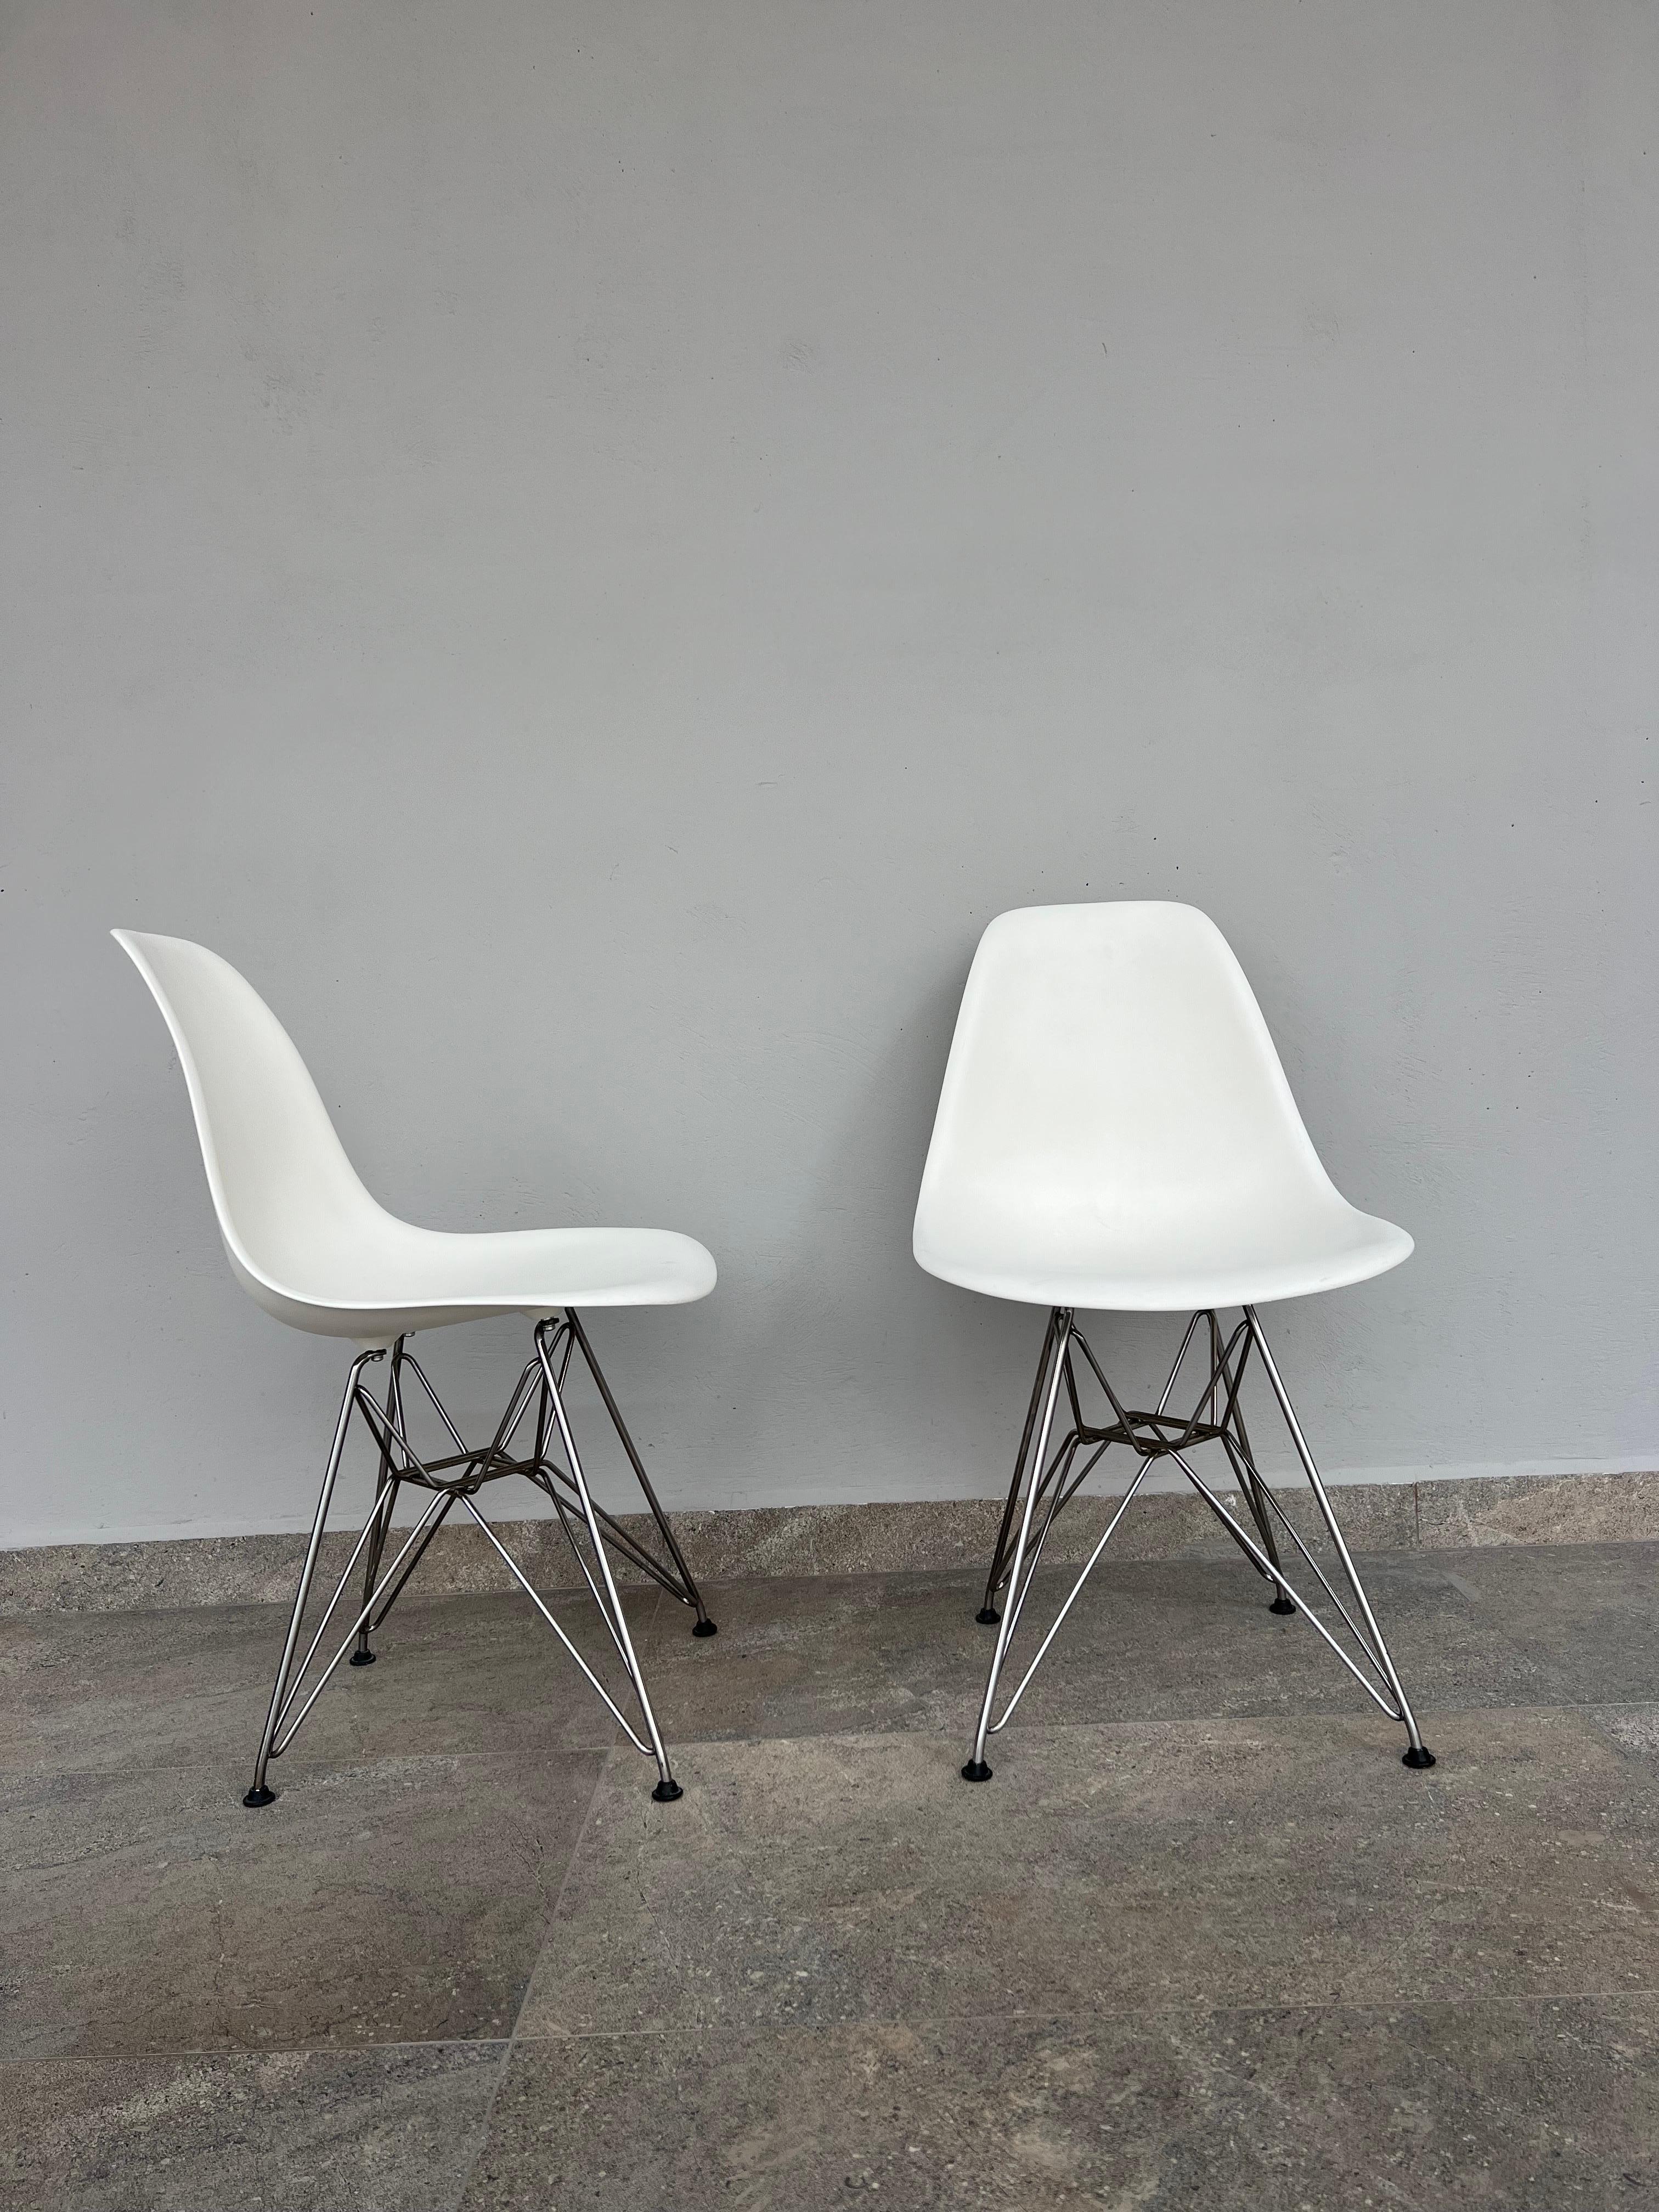 Pair of Eames Molded White Plastic Chairs with Eiffel Tower Bases In Good Condition For Sale In San Pedro Garza Garcia, Nuevo Leon